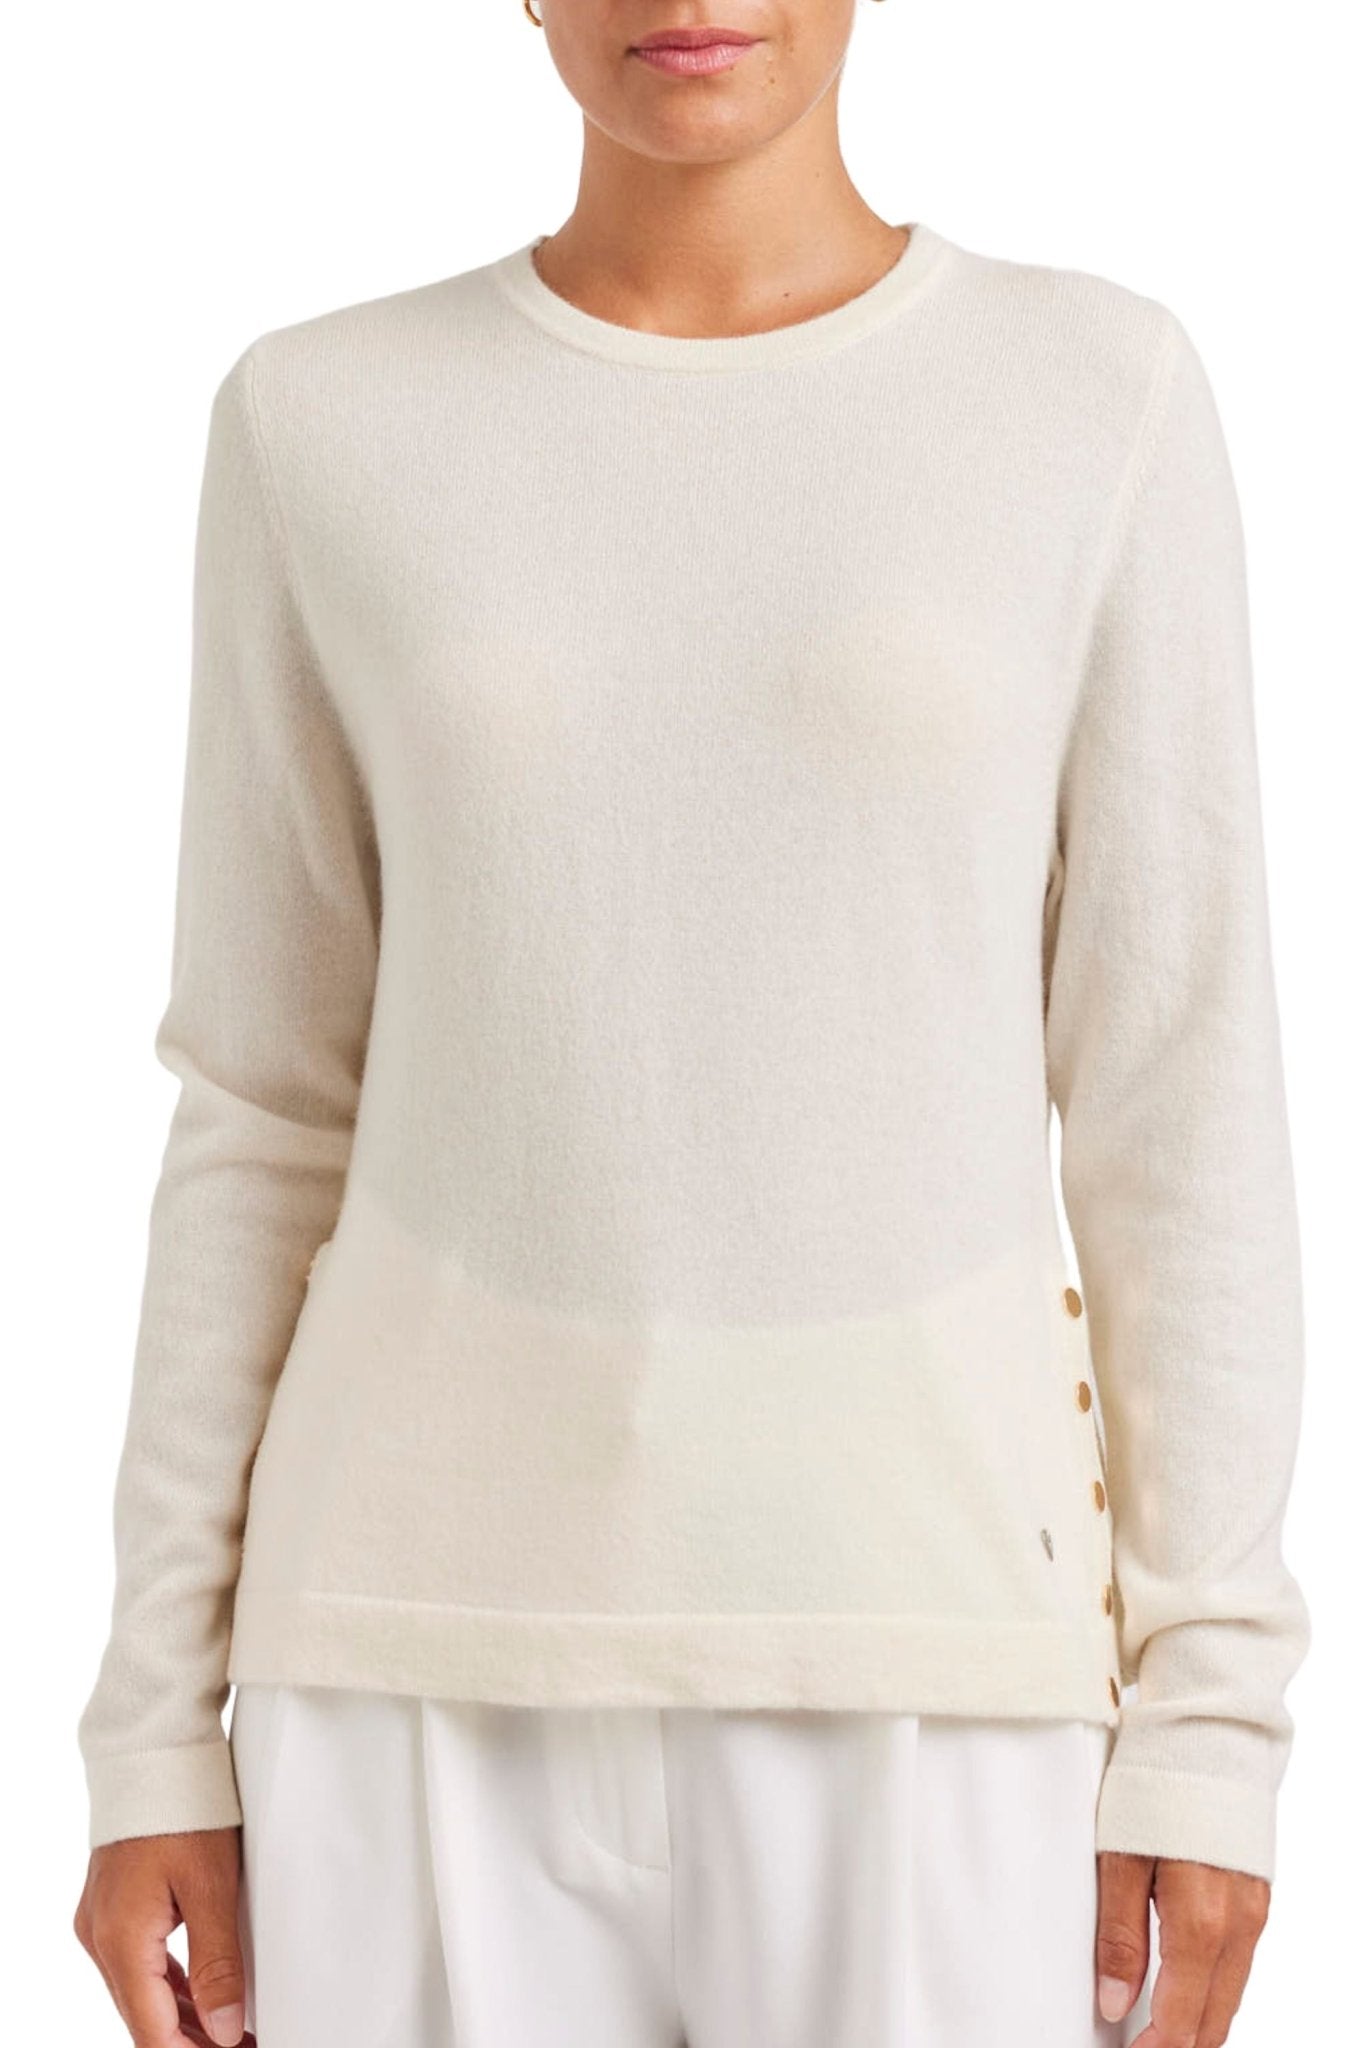 ALESSANDRA-WHAT-A-STUD-SWEATER-W23-1.010